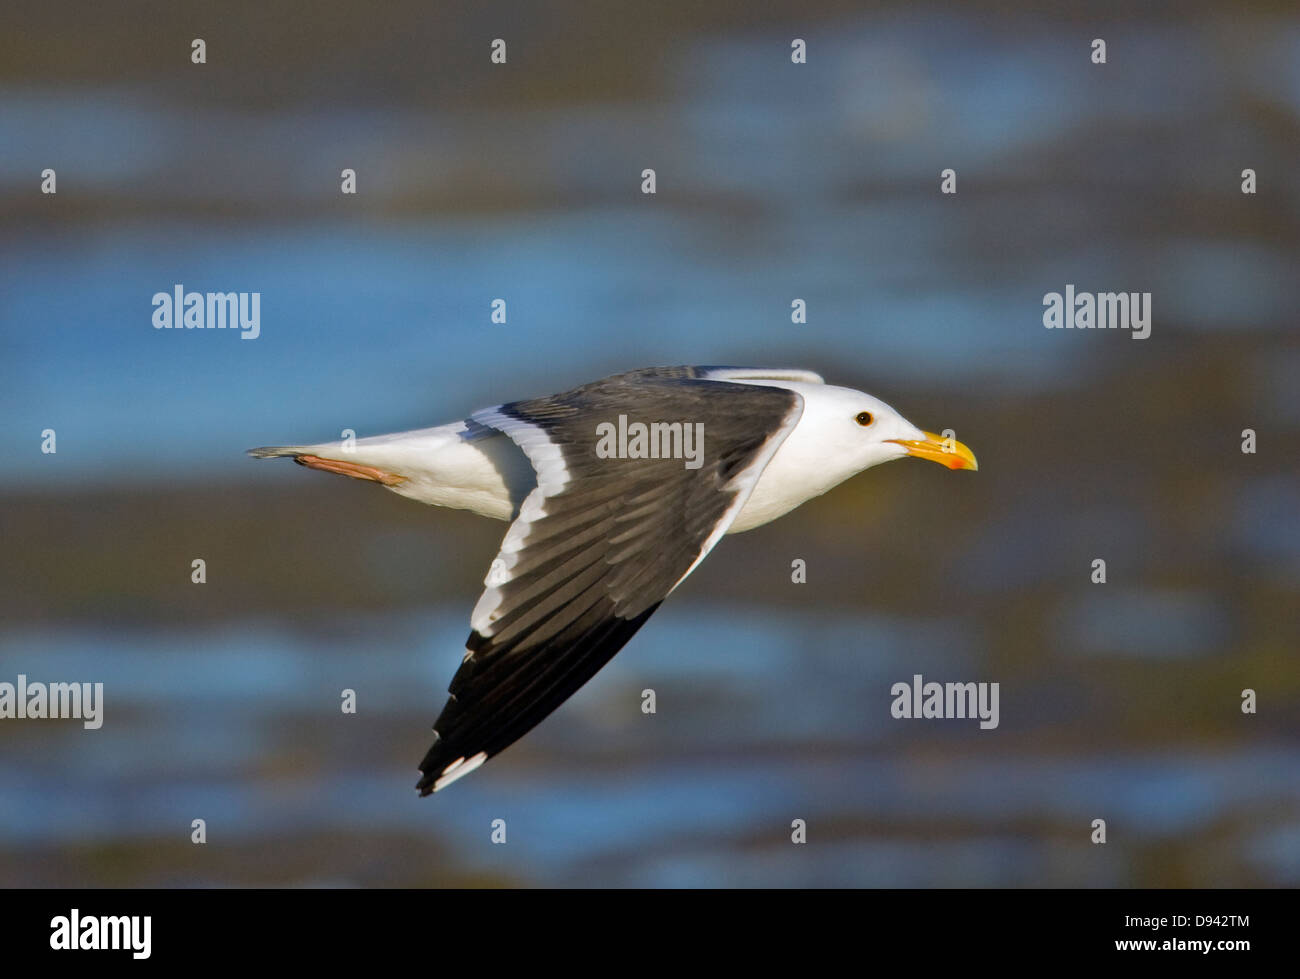 A flying gull over the ocean. Stock Photo